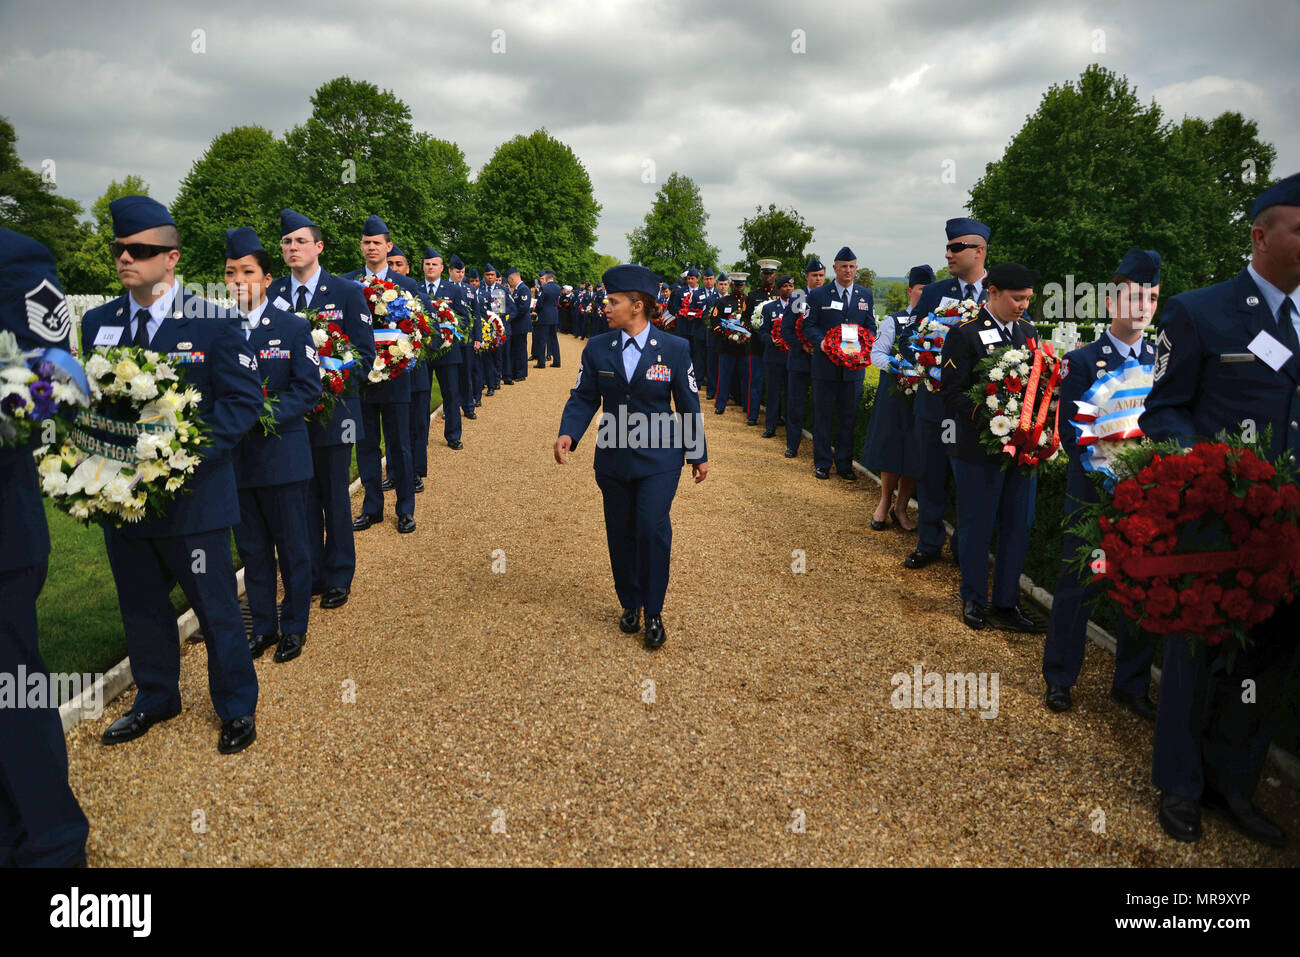 U.S. Air Force Senior Master Sgt. Arwa Cavendar, 100th Aircraft Maintenance Squadron first sergeant, provides a pre-ceremony inspection prior to the Madingley Memorial Day Ceremony May 29, 2017, at Madingley Memorial Cemetery in Cambridge, England. The event included a wreath laying, fly overs and a firing of volleys. (U.S. Air Force photo by Senior Airman Christine Groening) Stock Photo